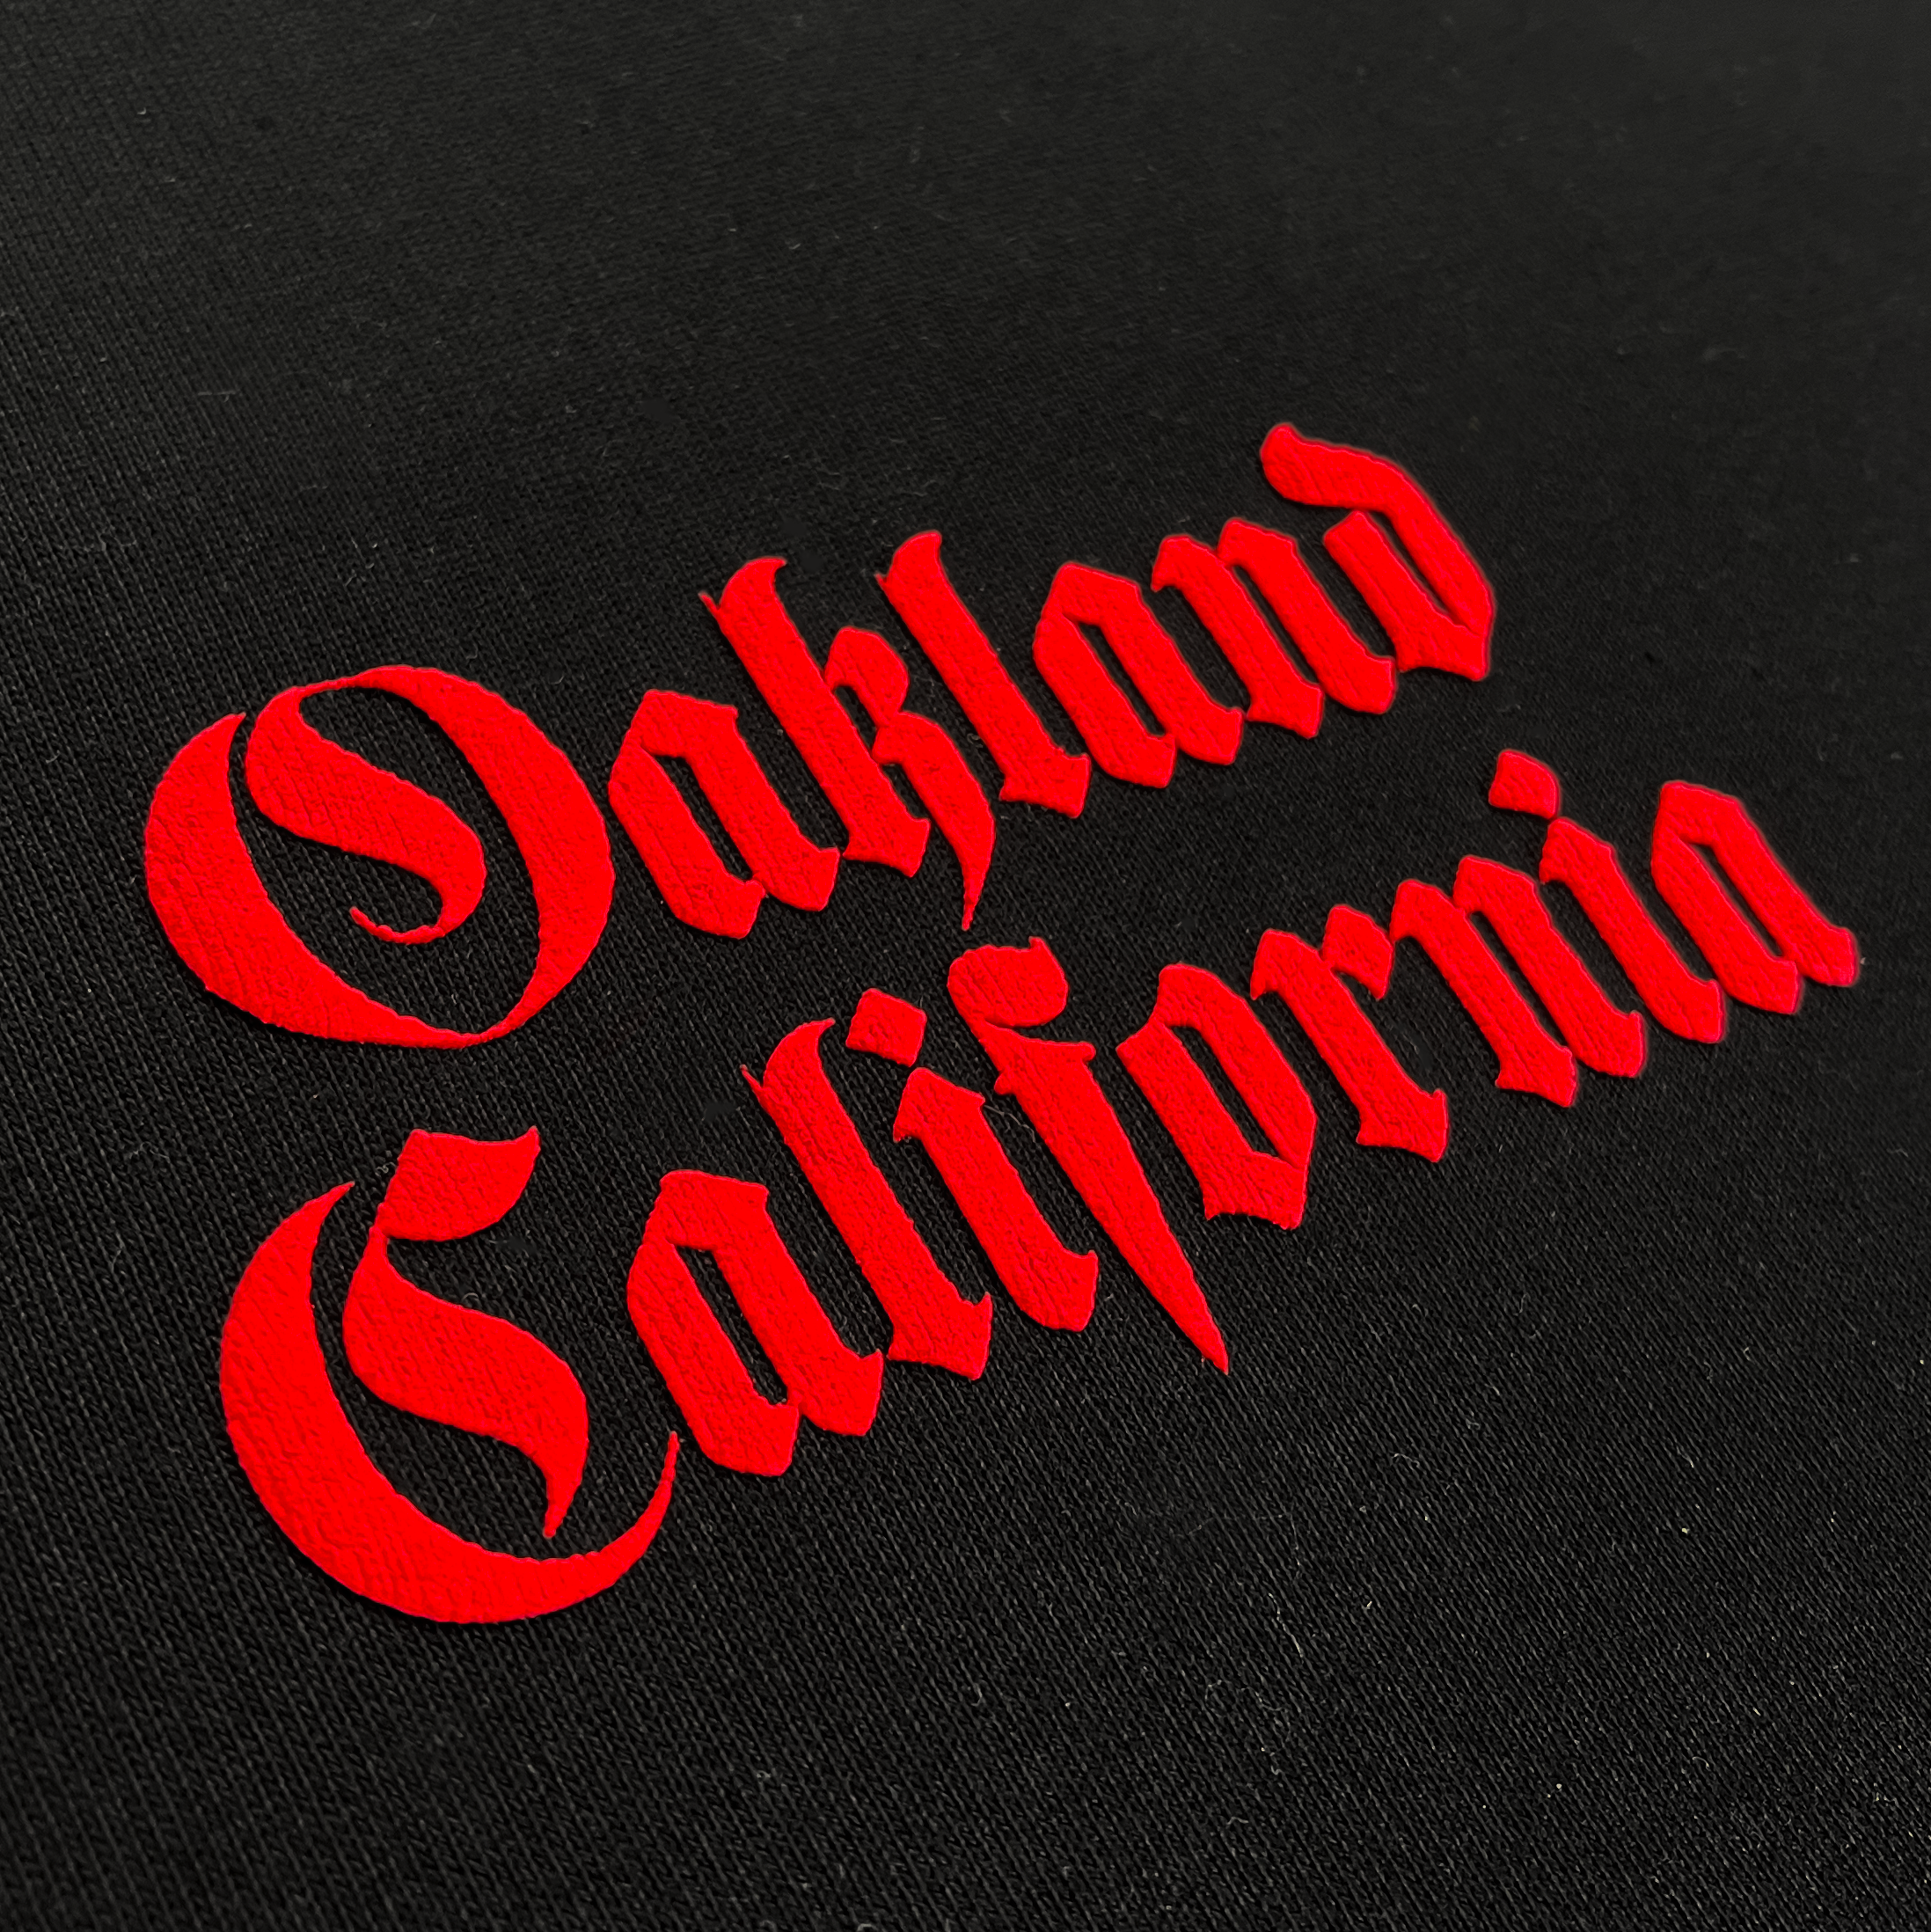 Detailed view of black tee with Oakland California printed centered in red ink.